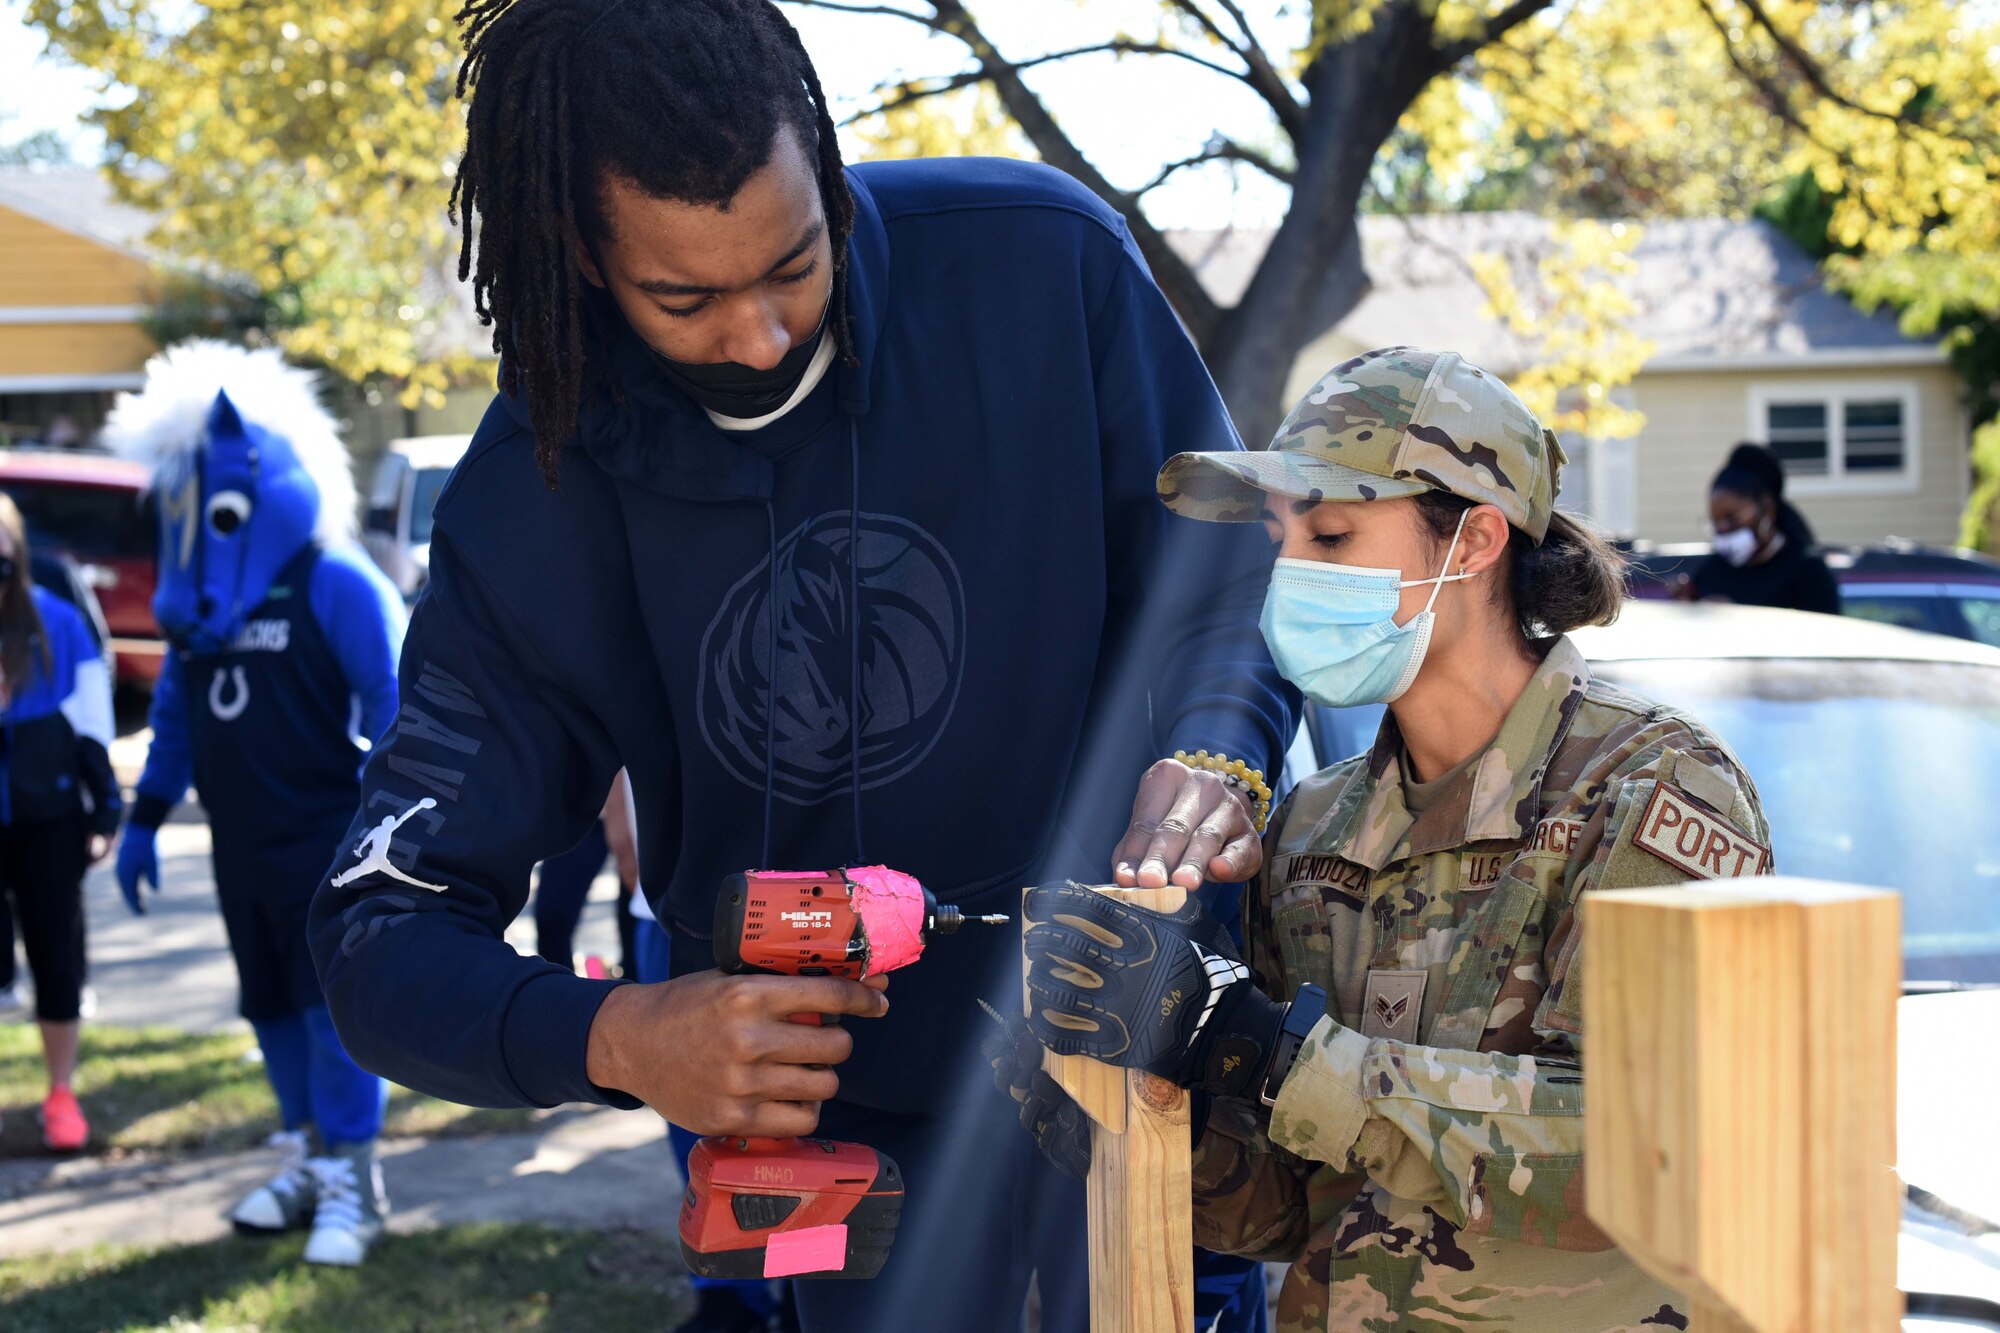 Moses Brown, Dallas Mavericks center number 9, and Senior Airman Laura Mendoza, 73rd Aerial Port Squadron porter, assemble a ramp during a Hoops for Troops event in Dallas, Texas on November 6, 2020.  The event allows military members to volunteer with NBA employees, coaches and players to make positive impacts in their local areas. (U.S. Air Force photo by Staff Sgt. Randall Moose)